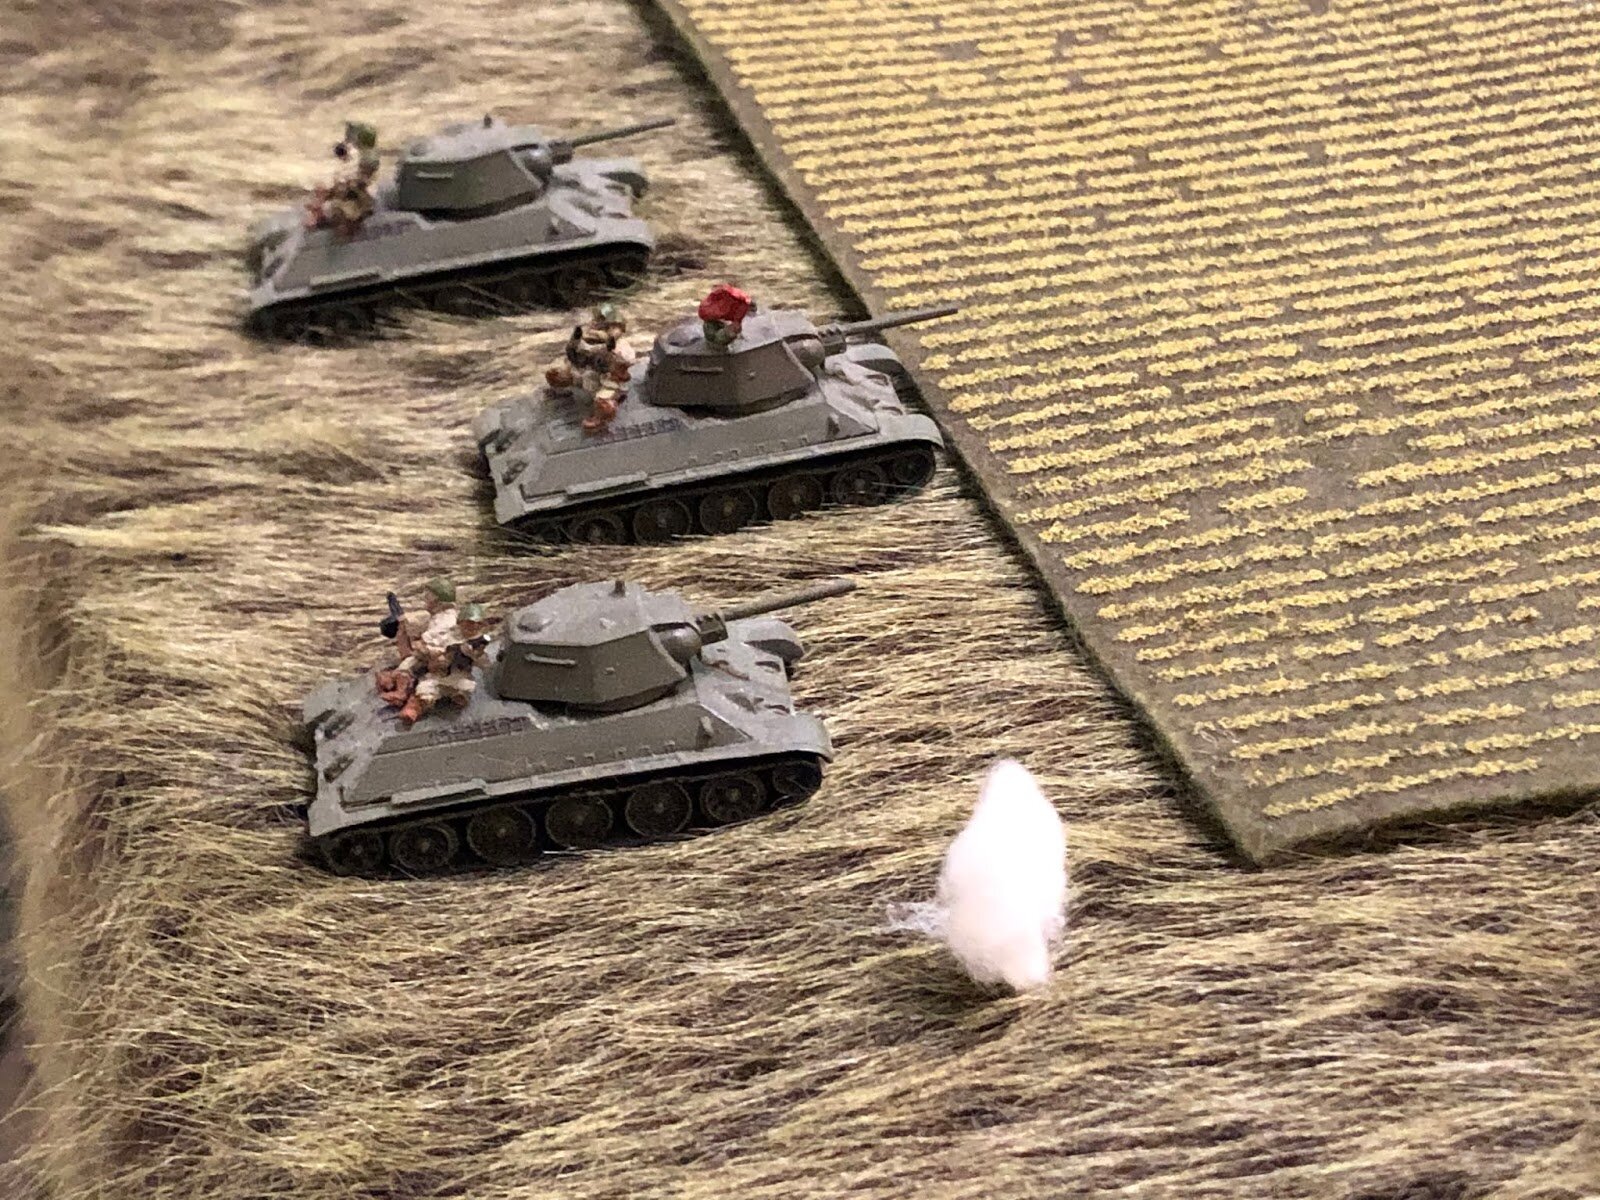  The 75mm round slams into the earth besides the Soviet 1st Tank Platoon, showering the hapless infantry riding on the back deck in large clods of dirt! 